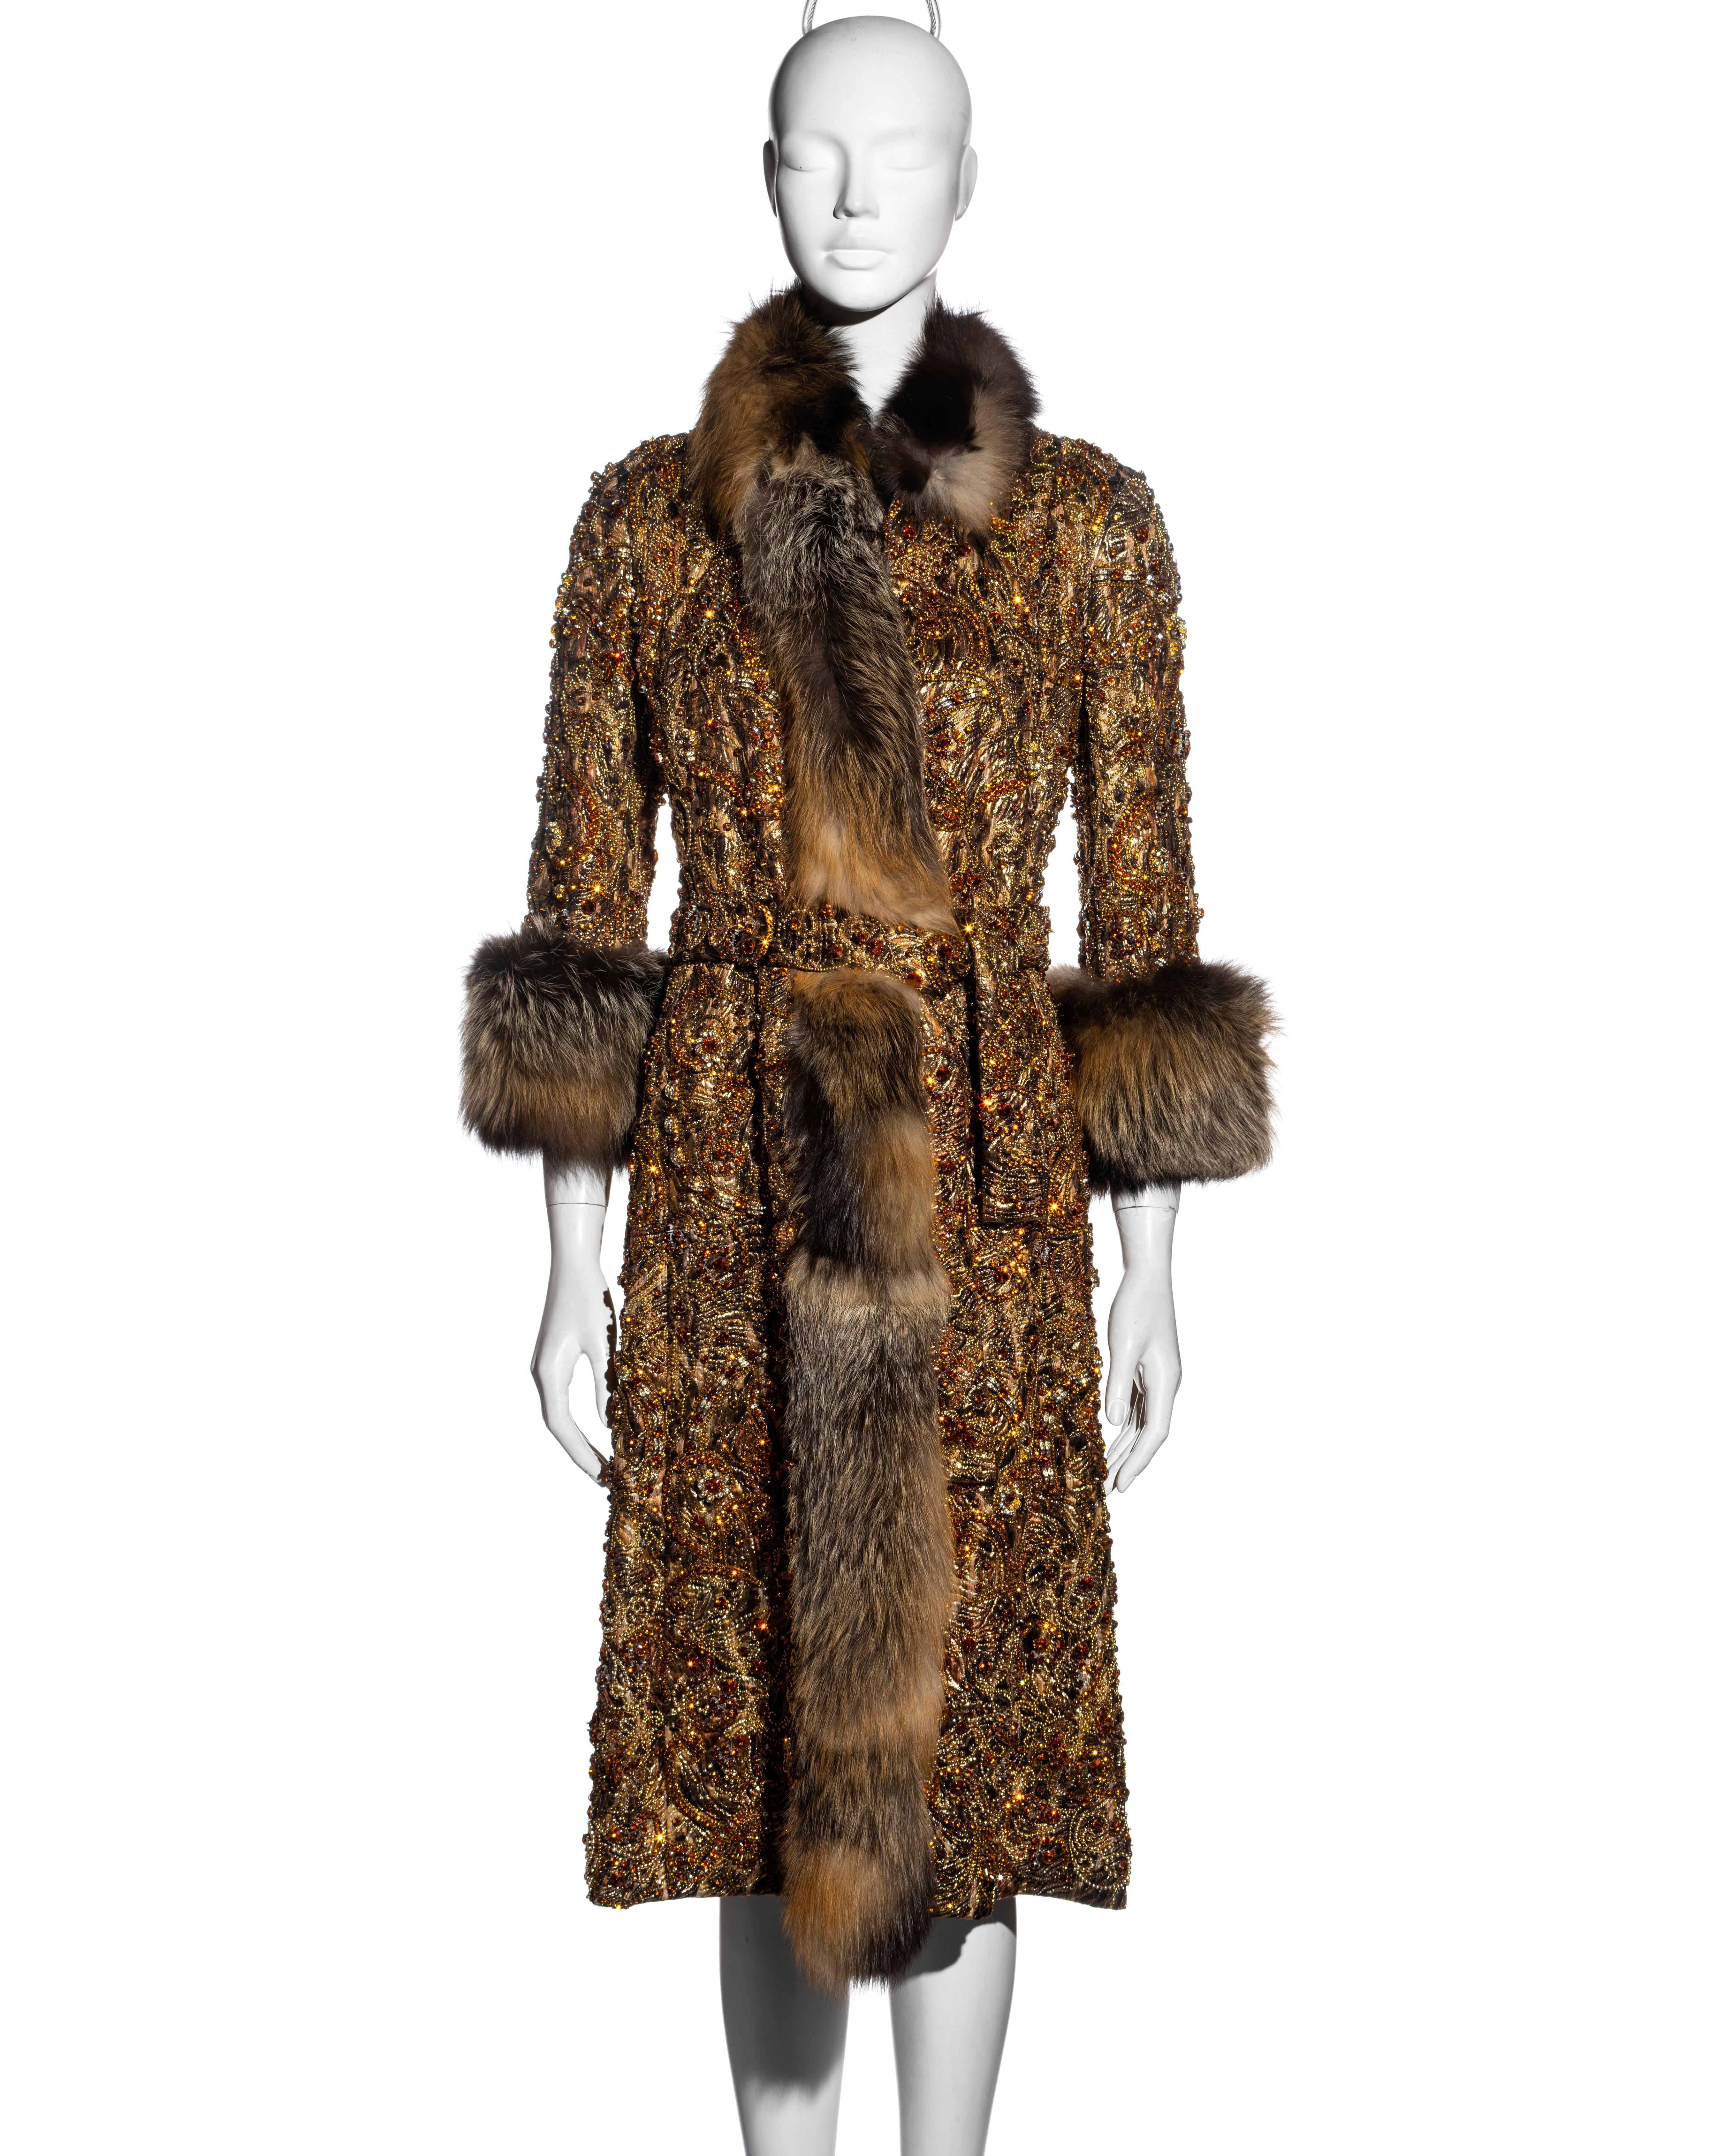 ▪ Dolce & Gabbana brocade and fox fur embellished evening coat
▪ Bronze brocade 
▪ Fox fur trim, collar and cuffs 
▪ Embellished with a plethora of crystals, stones and beads 
▪ Matching embellished belt
▪ Heavyweight 
▪ Lined with black silk
▪ IT